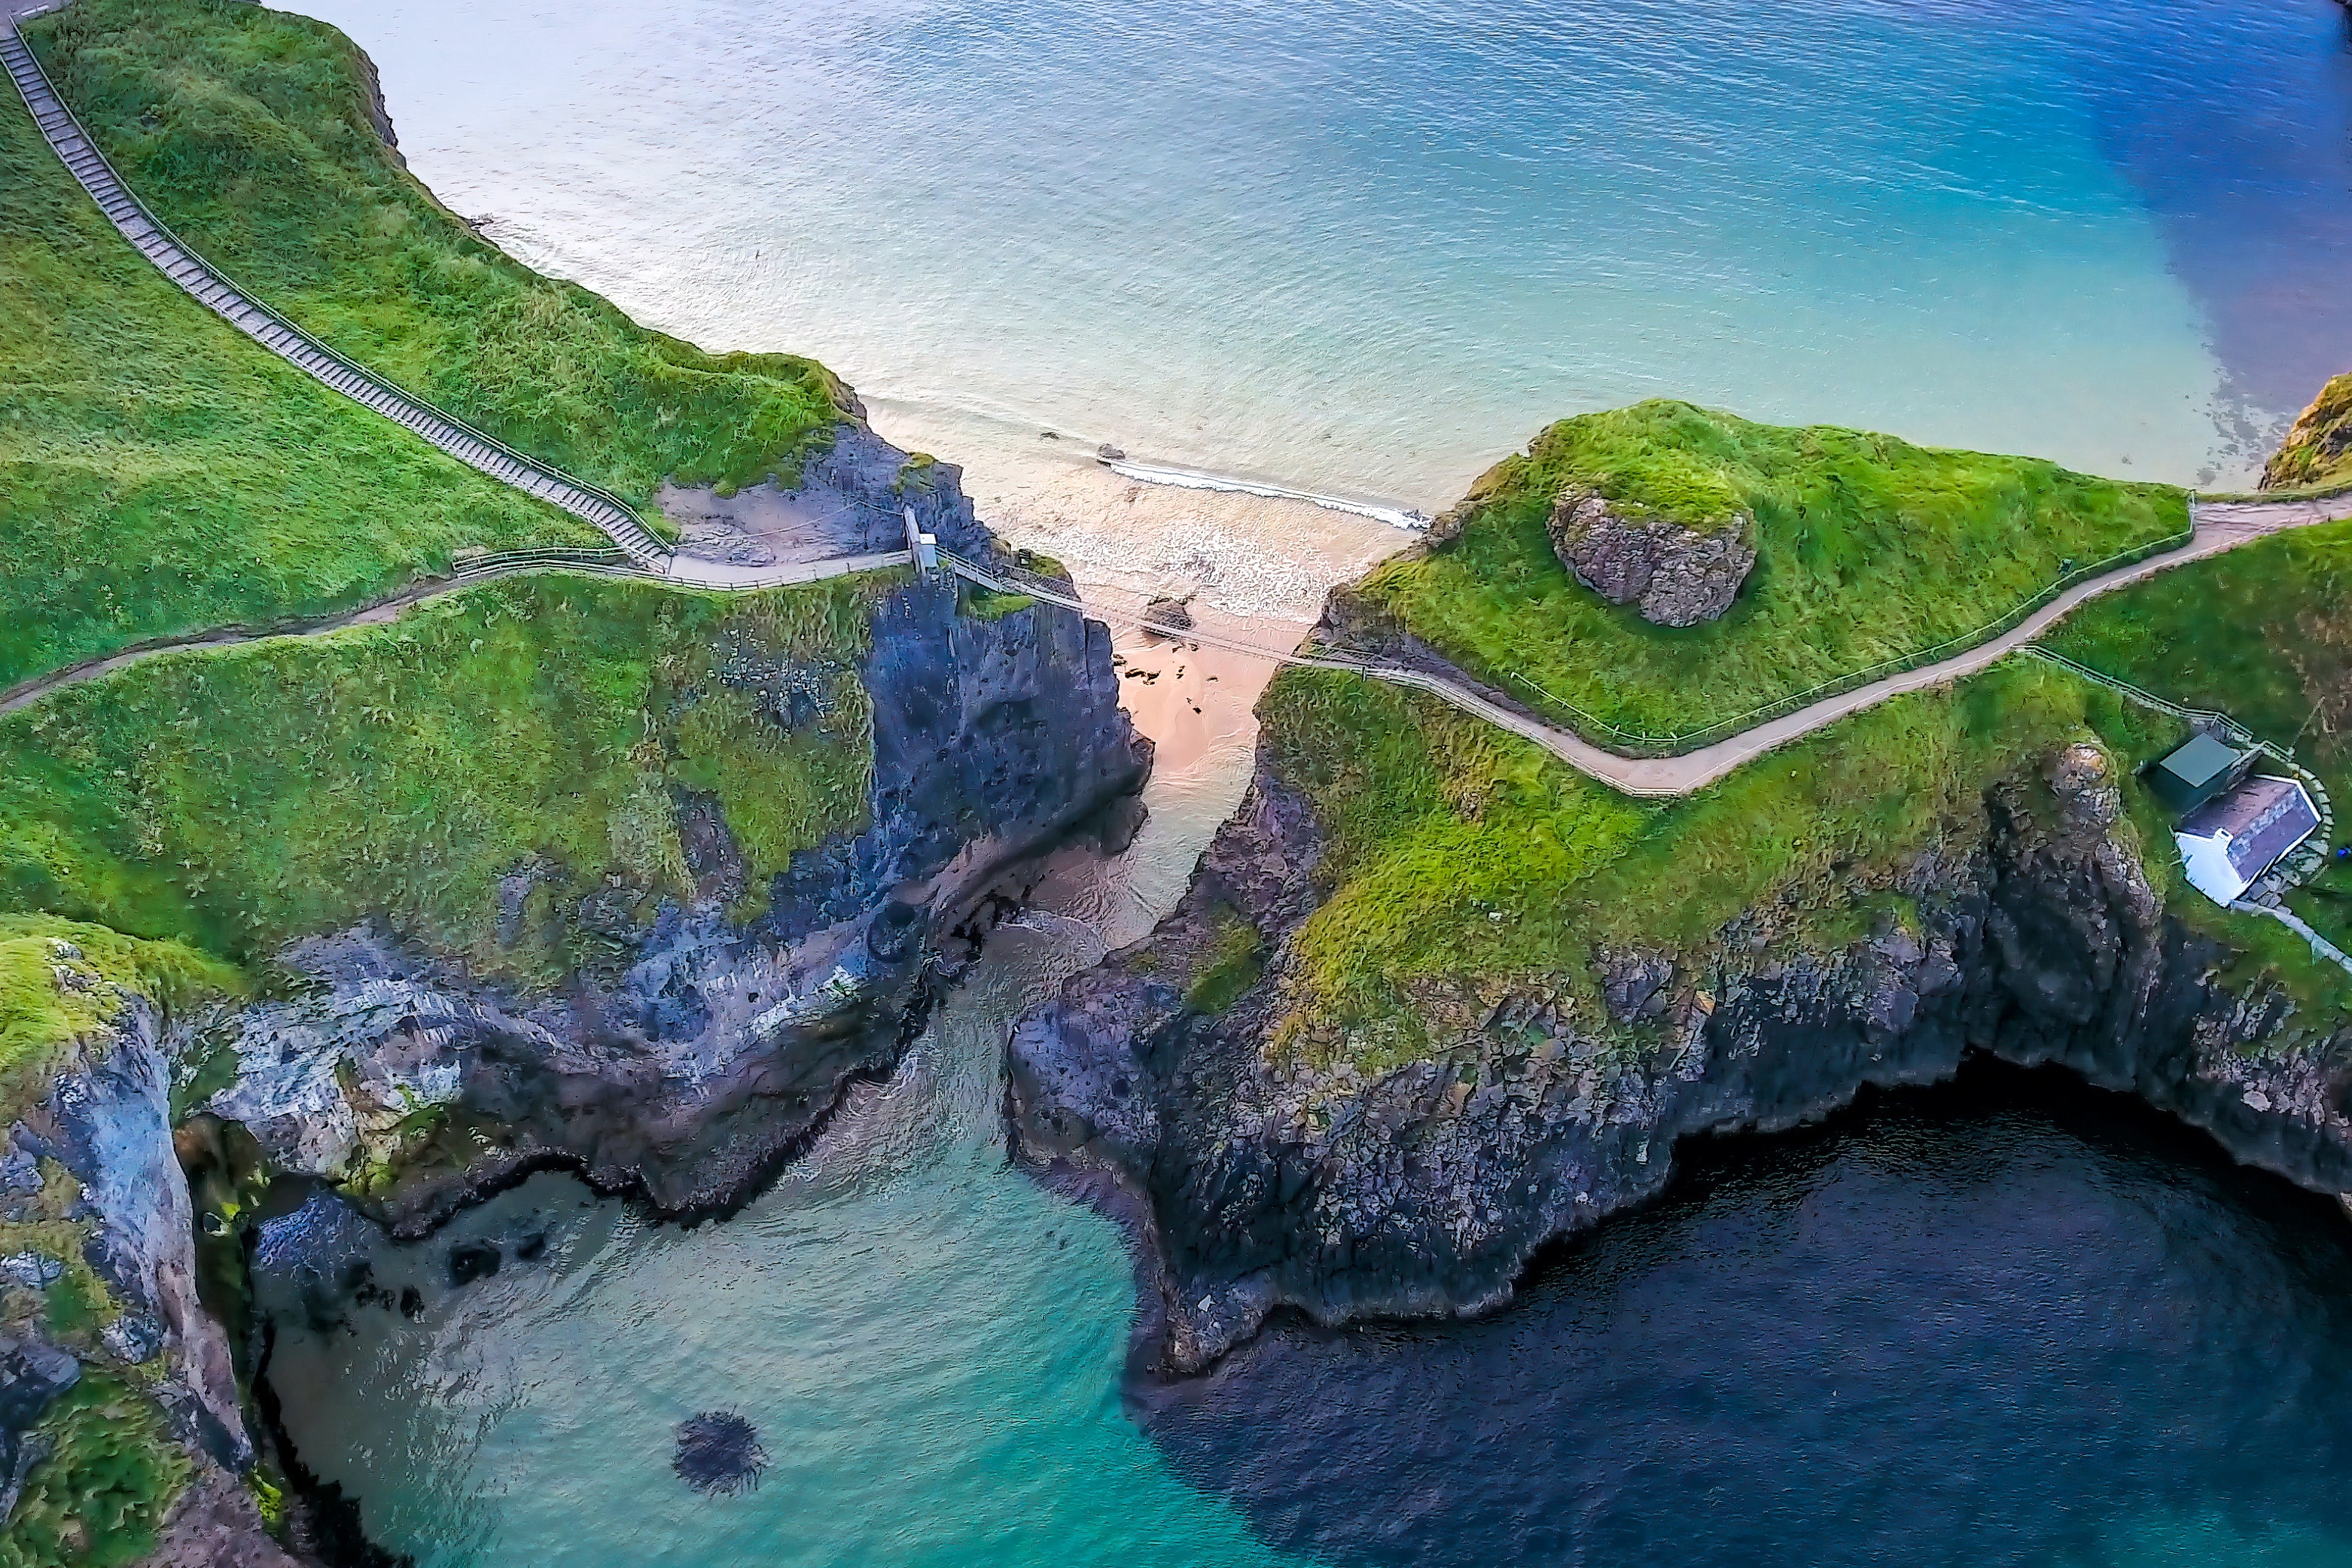 <p><strong>Location:</strong> County Antrim</p> <p>Suspended almost 100 feet above sea level, the Carrick-a-Rede Rope Bridge was first built by salmon fishermen over 200 years ago. Although the last fish was caught here in 2002, somewhere around a quarter of a million visitors cross the bridge for both thrills and scenery. Tourists walking the 66-foot path are rewarded with views of Rathlin Island, <a href="https://www.cntraveler.com/galleries/2016-04-06/10-amazing-things-you-need-to-see-in-scotland?mbid=synd_msn_rss&utm_source=msn&utm_medium=syndication">Scotland</a>, and the Irish Sea. A lucky few might even spot some sharks and porpoises below in the water...if they dare to look down.</p><p>Sign up to receive the latest news, expert tips, and inspiration on all things travel</p><a href="https://www.cntraveler.com/newsletter/the-daily?sourceCode=msnsend">Inspire Me</a>